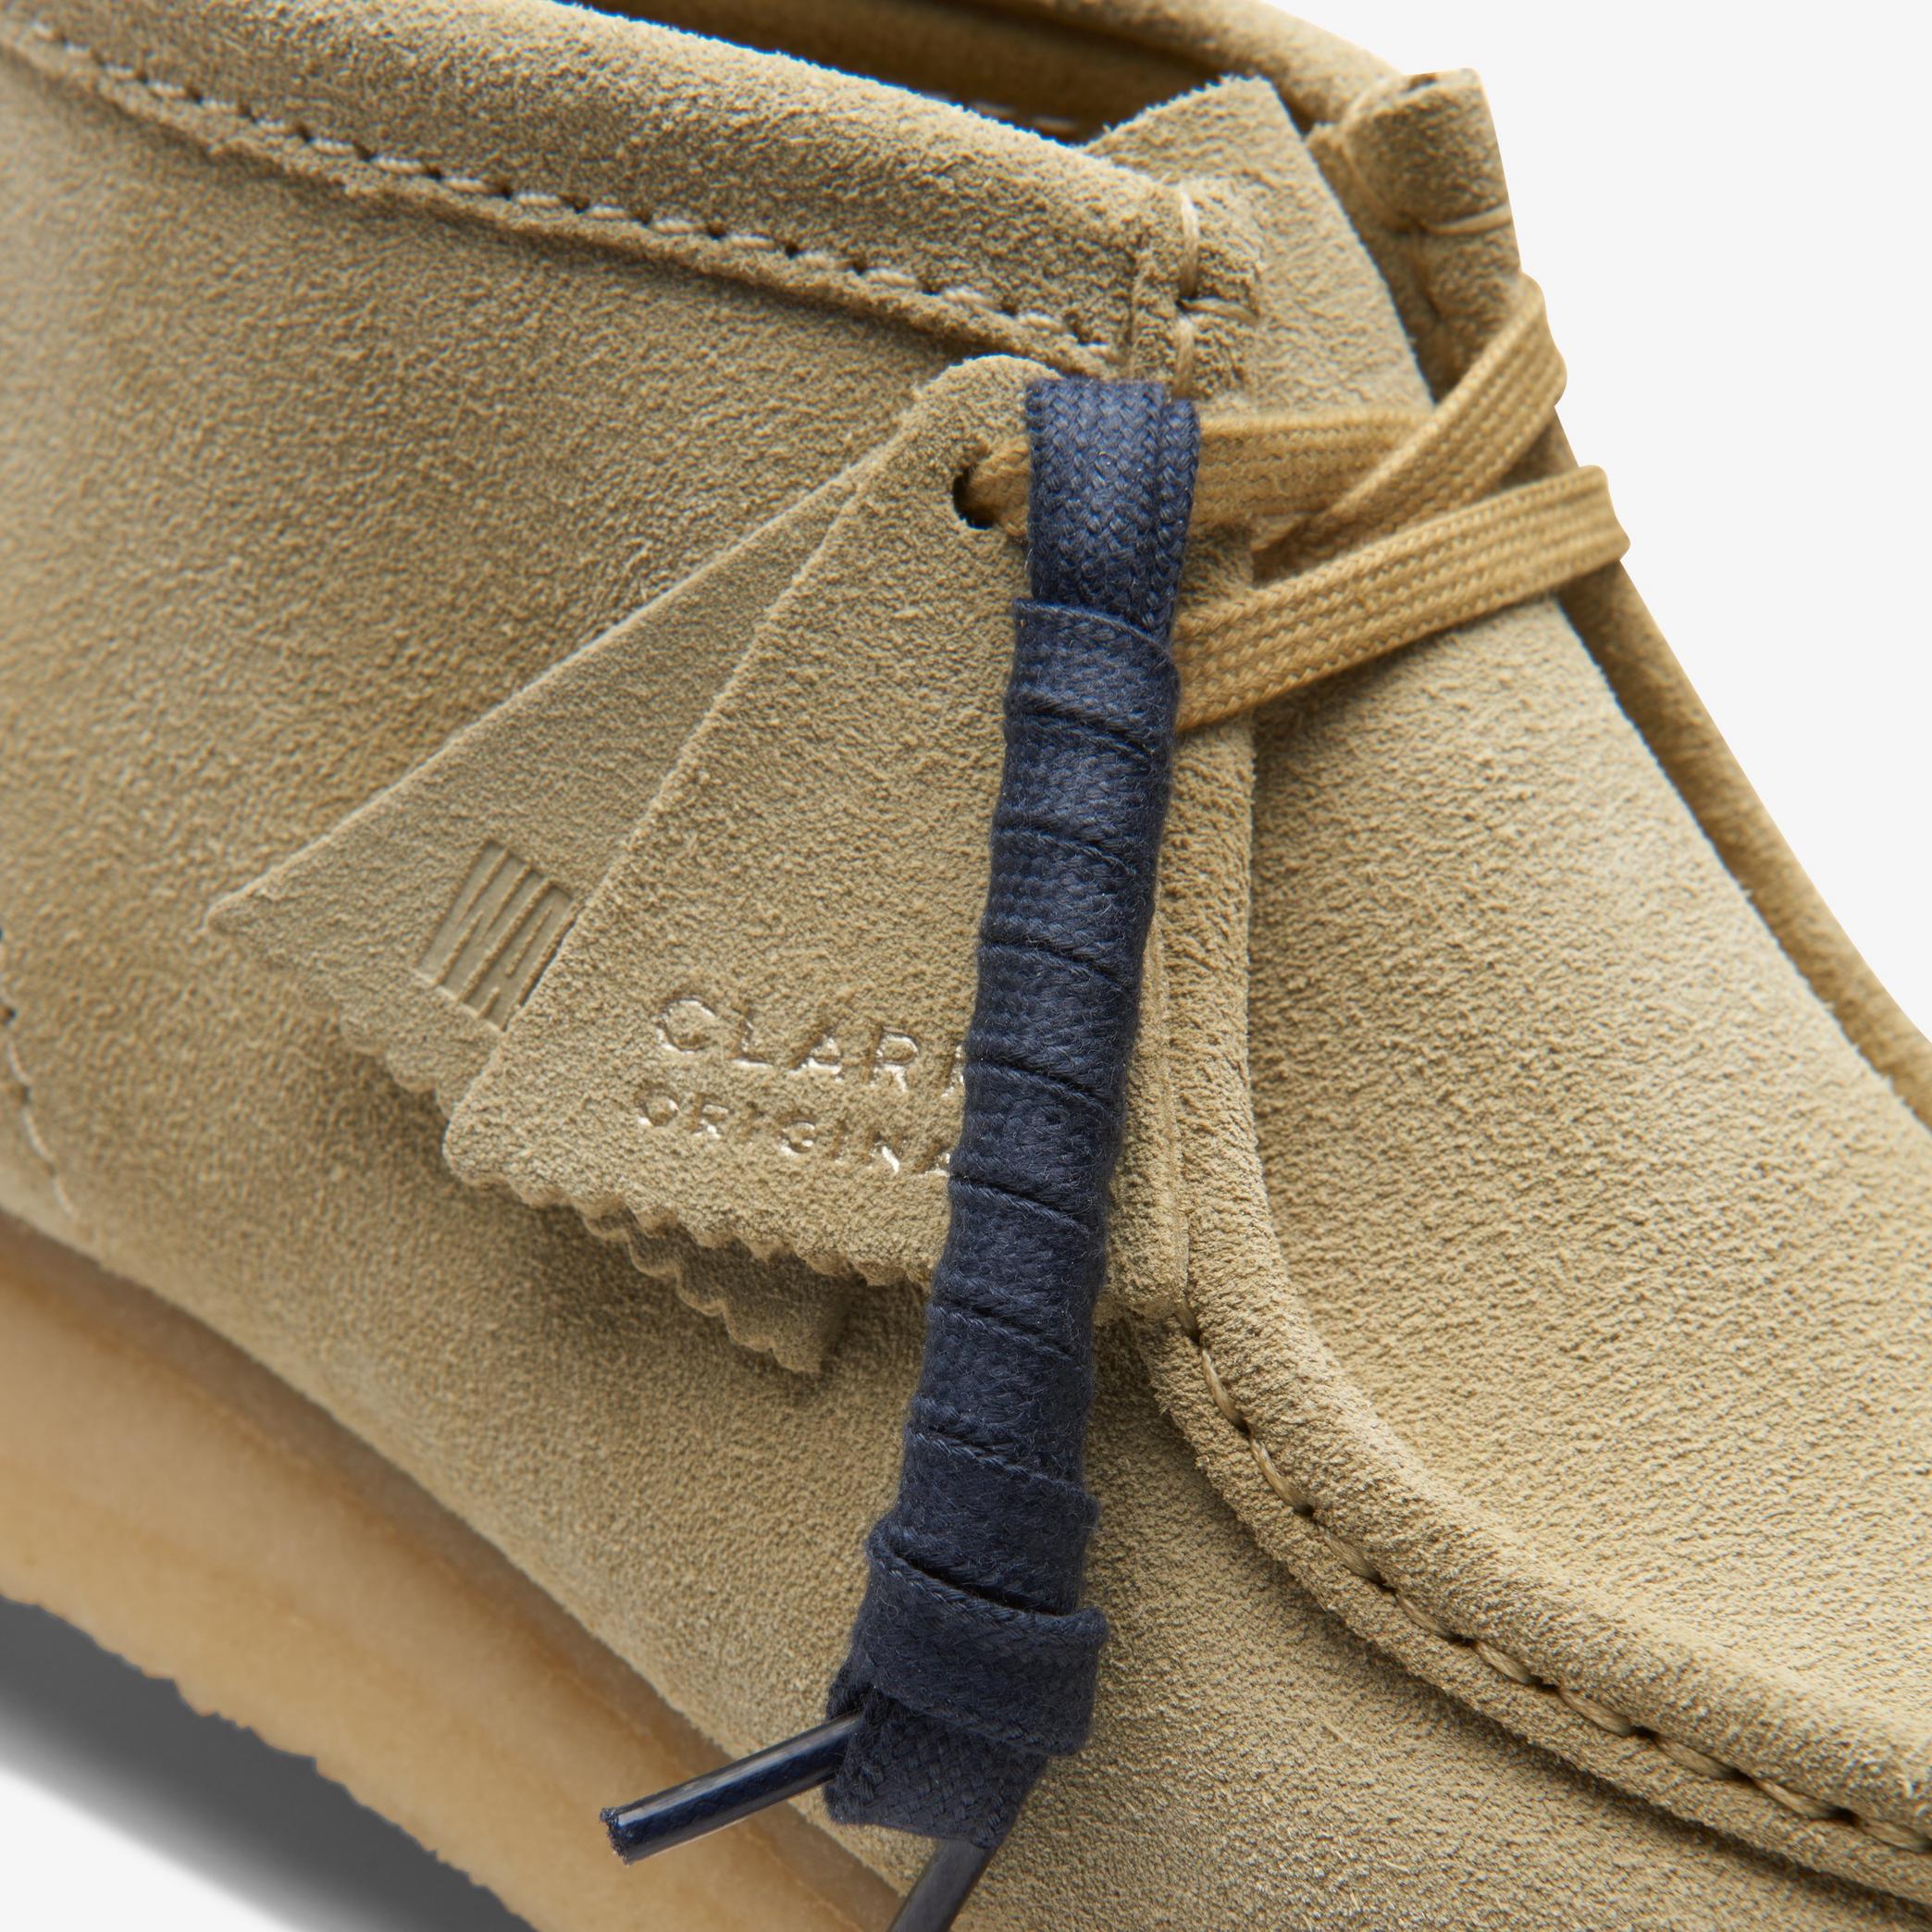 Wallabee Boot Maple Suede Boots, view 7 of 7